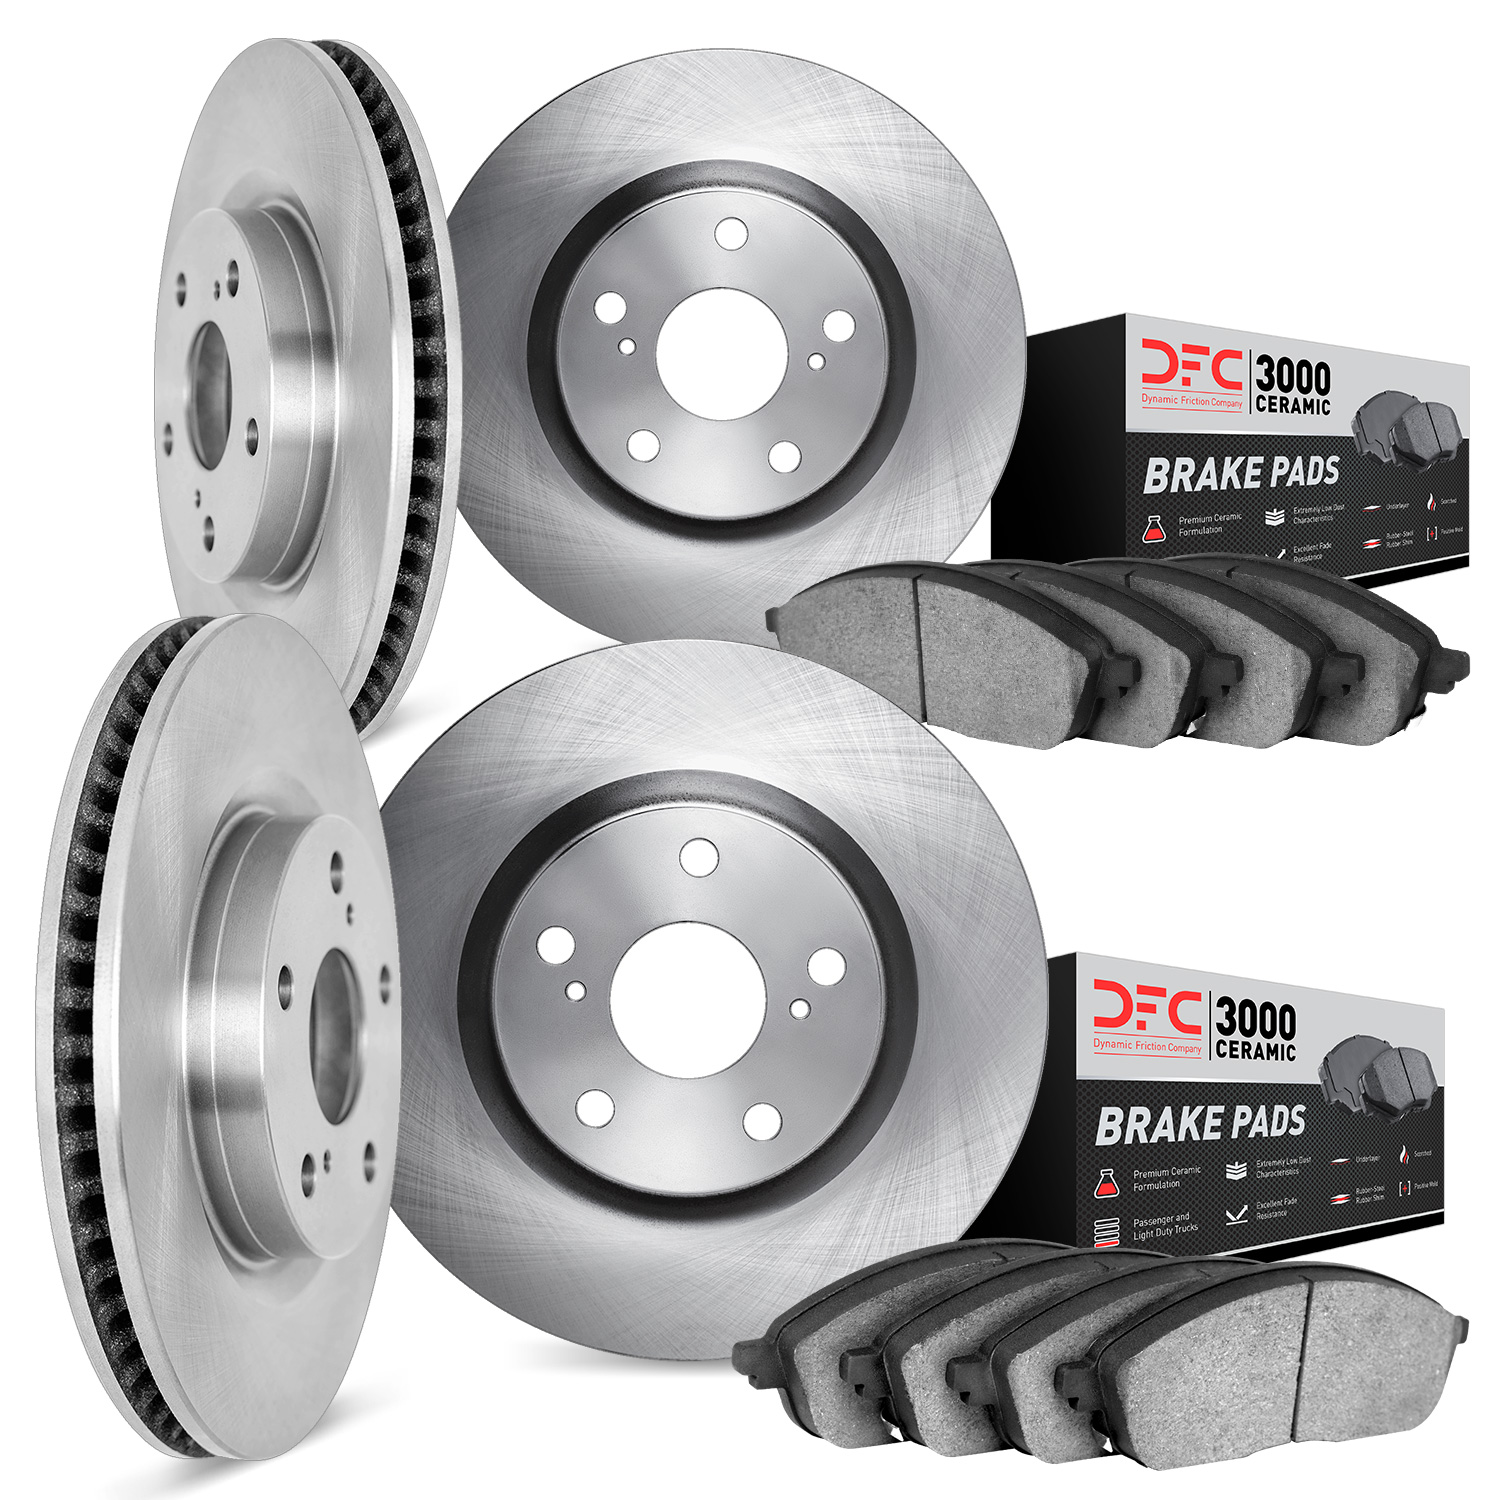 6304-75015 Brake Rotors with 3000-Series Ceramic Brake Pads Kit, 2014-2020 Lexus/Toyota/Scion, Position: Front and Rear